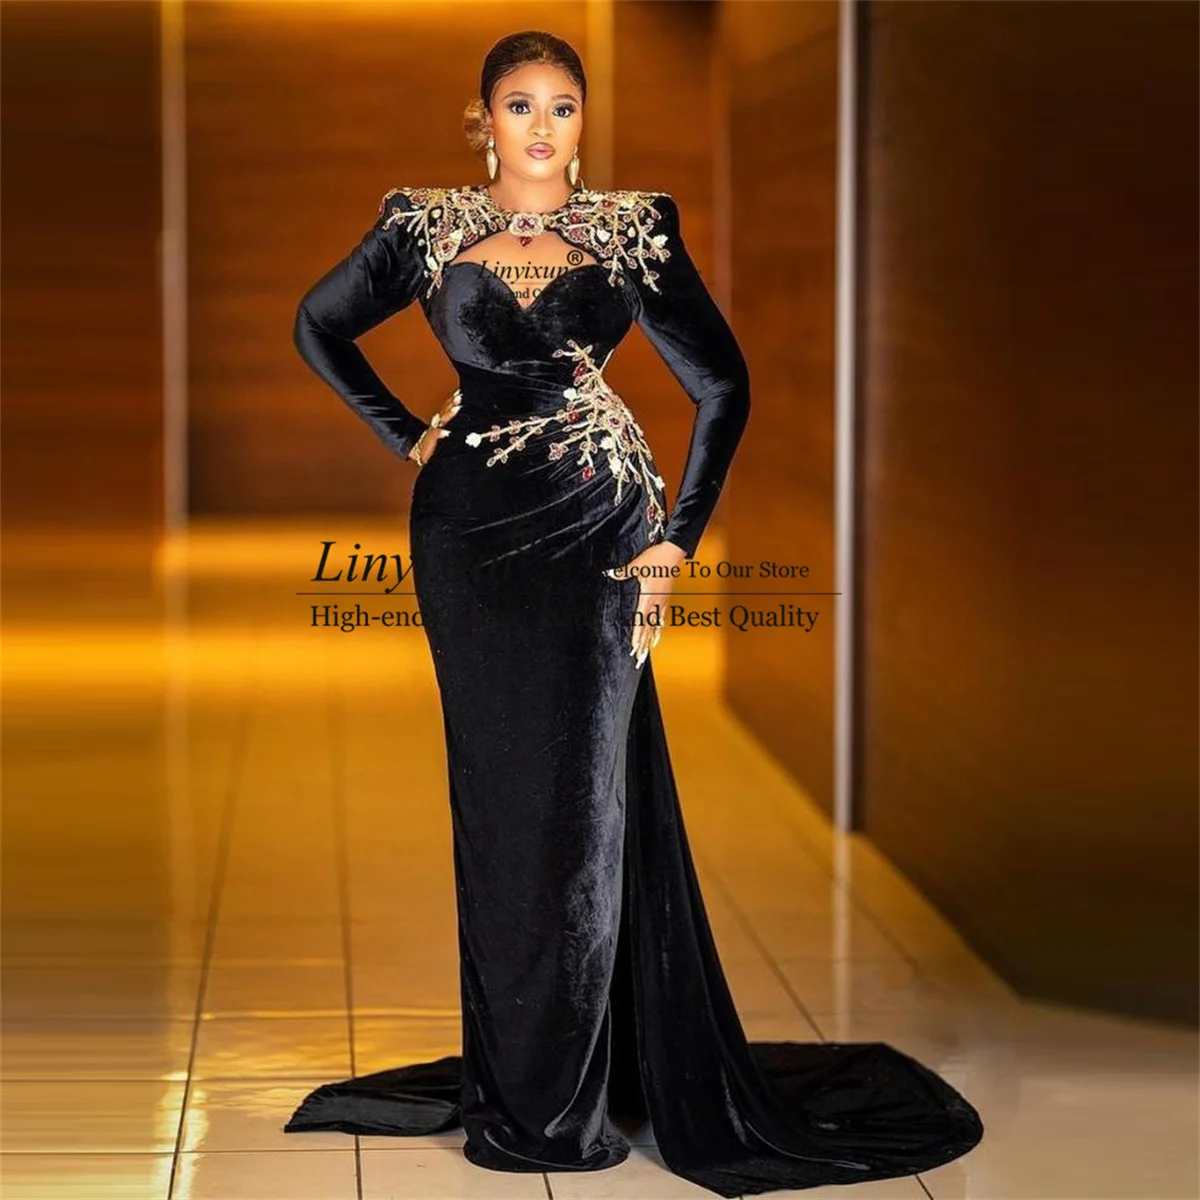 

Velvet Long Sleeves Prom Dresses With Appliques Beads Sweetheart Aso Ebi Women Formal Evening Gowns Court Train Party Dress